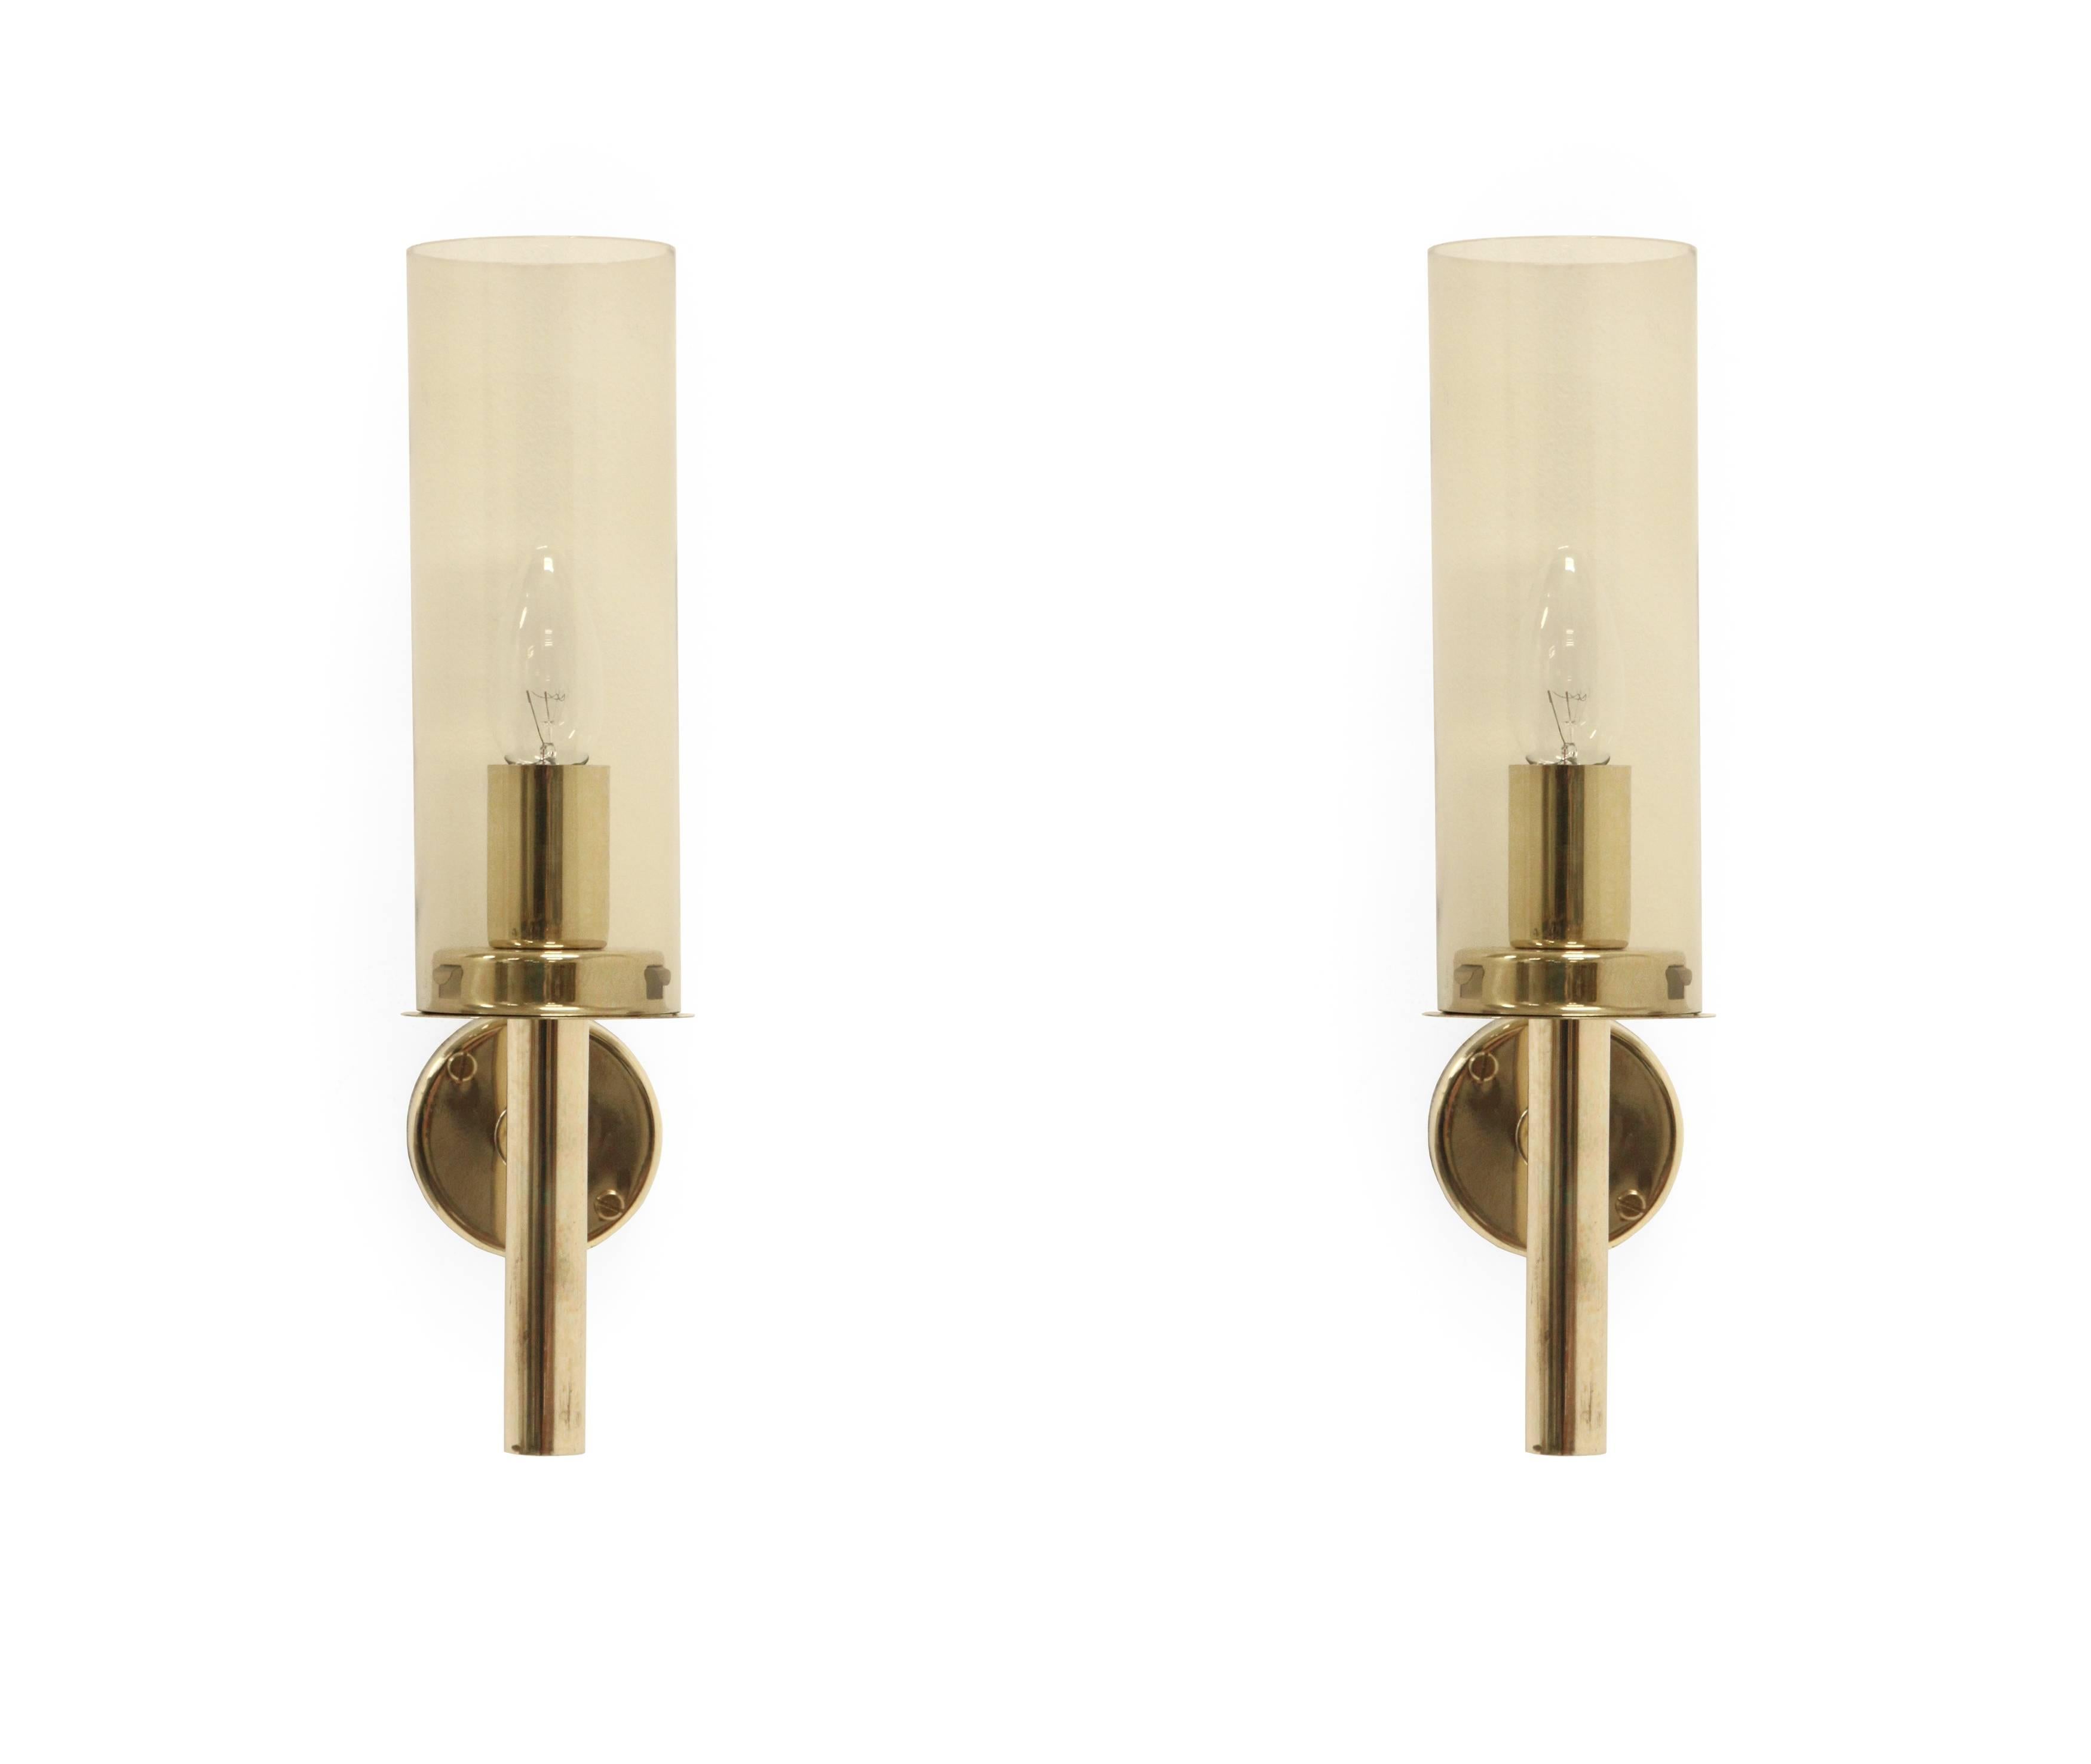 Modernist wall lamps in brass with shades in glass. Model '169/14'. Designed and made in Sweden by Hans-Agne Jakobsson from circa 1960 second half. Both lamps are fully working and in good vintage condition.
 